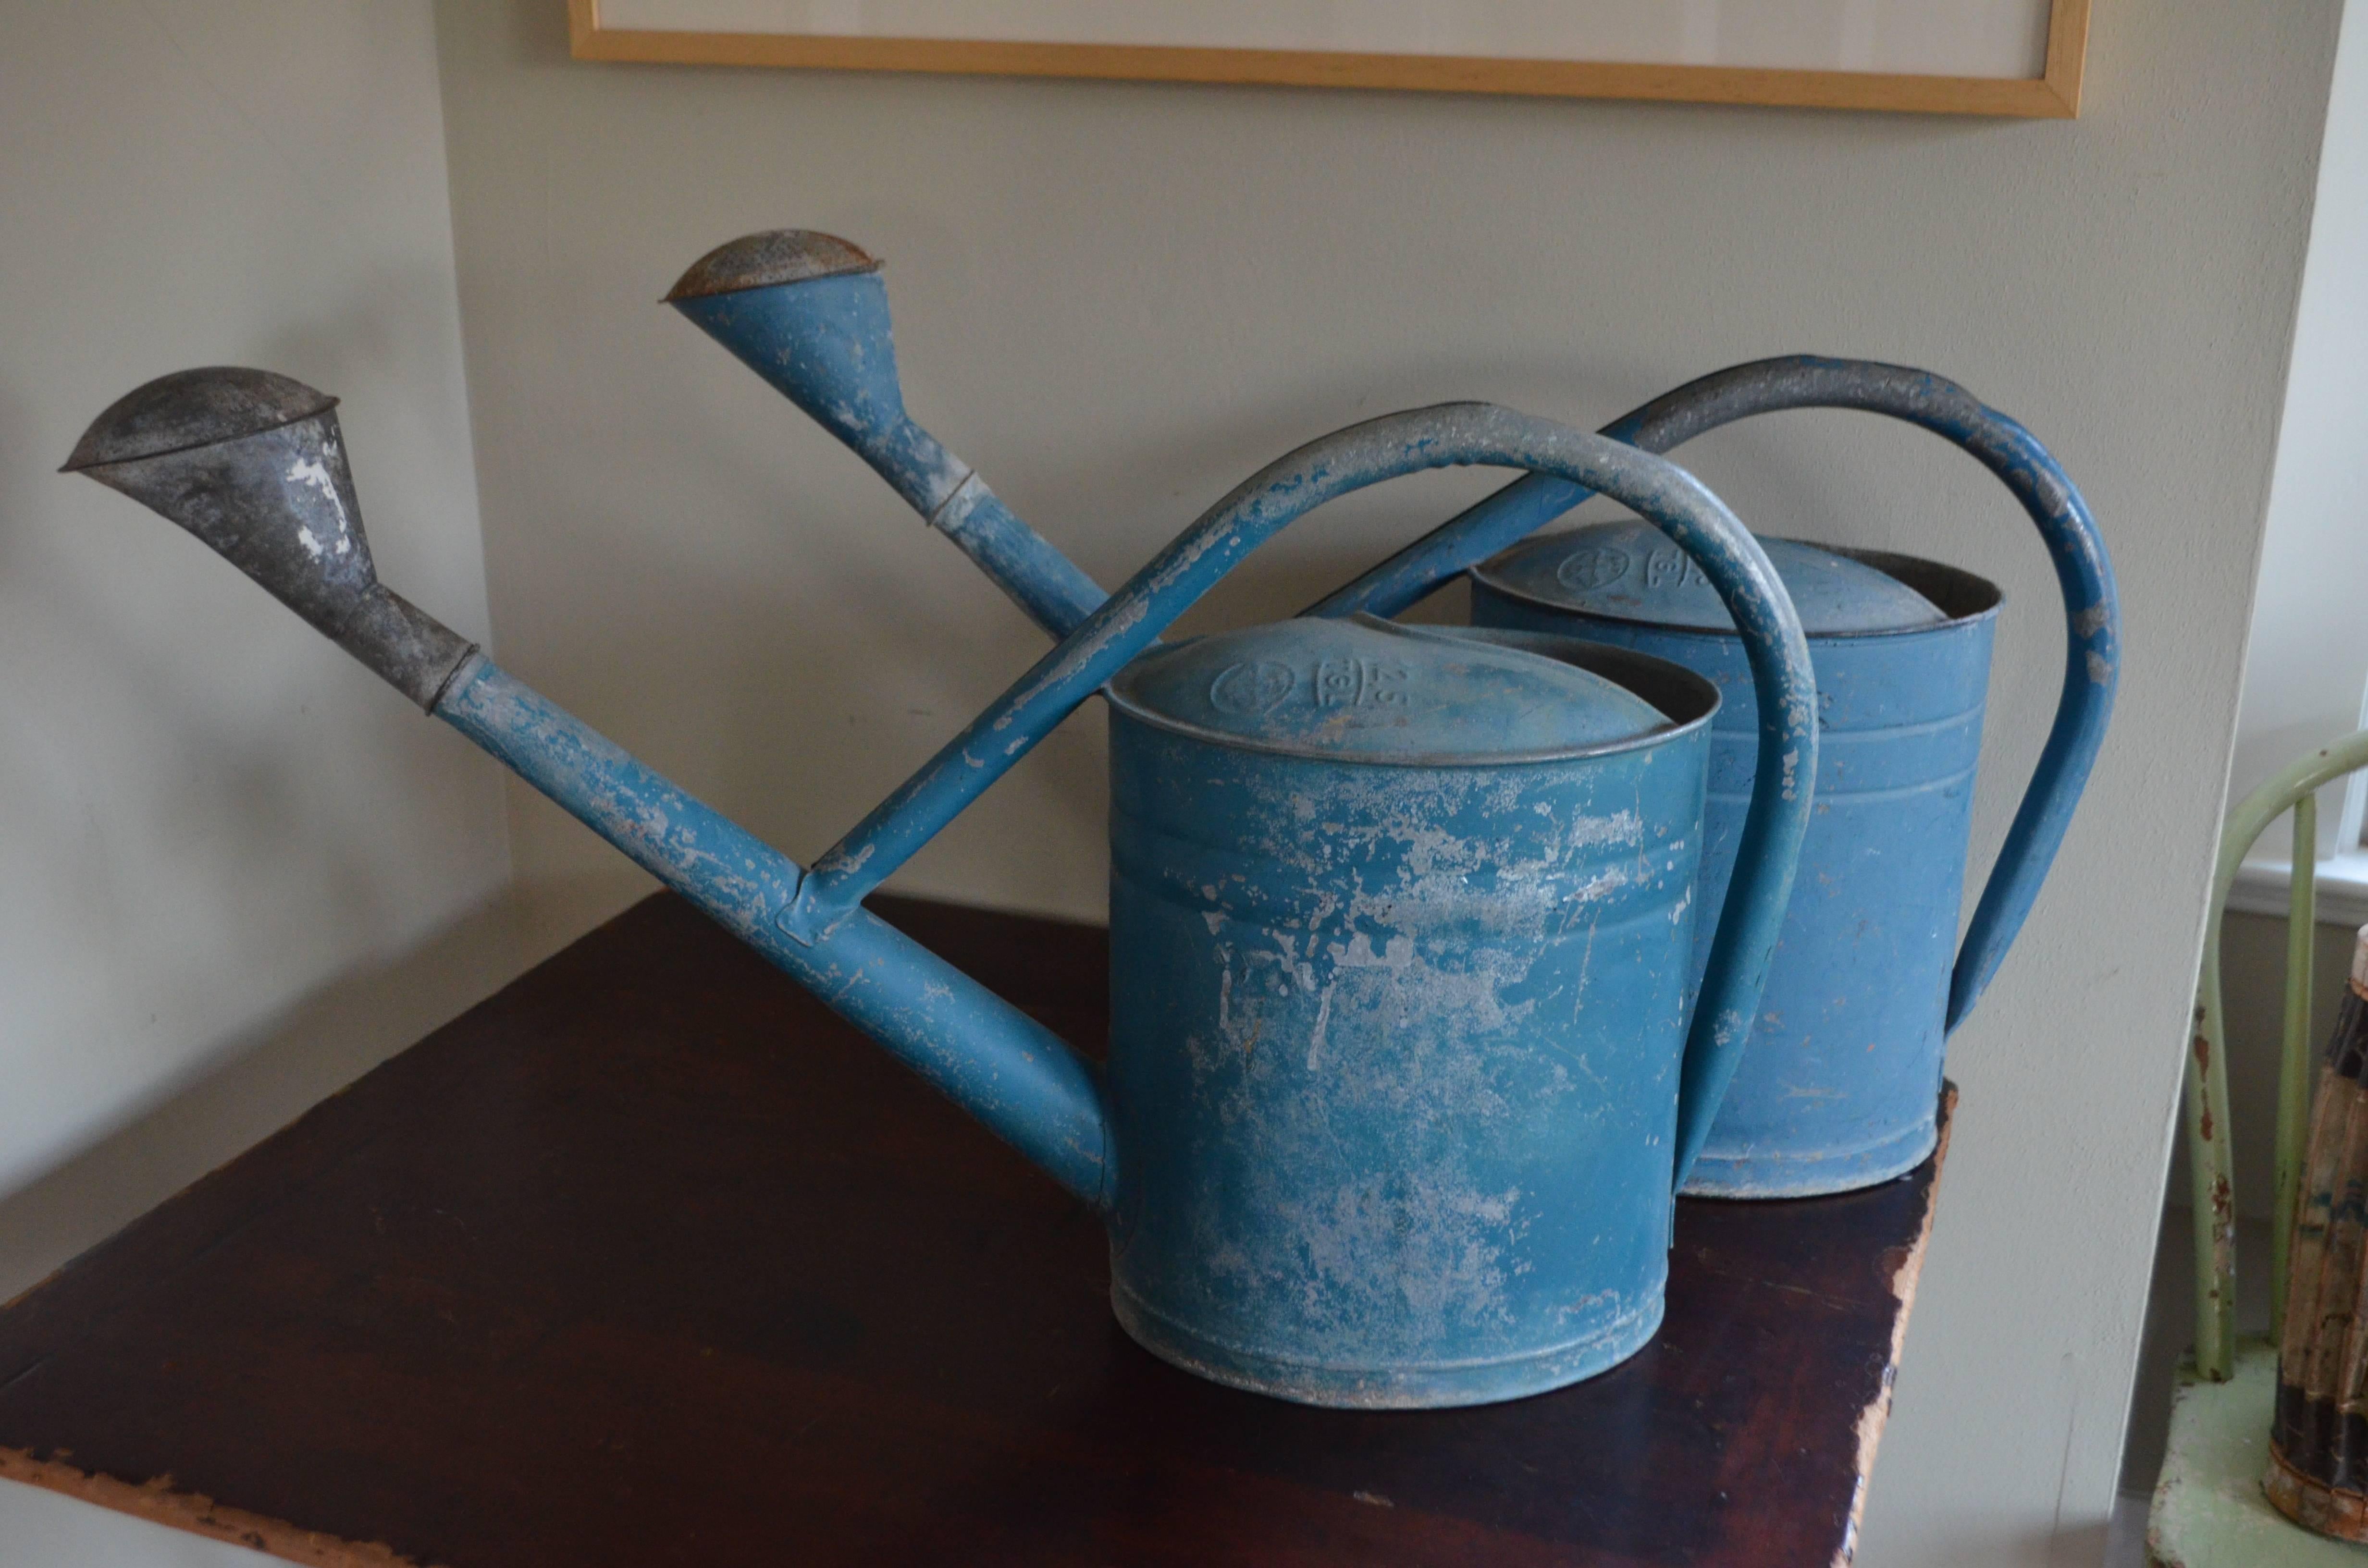 European BAT watering cans (pair) in worn blue paint, 12.5 liter capacity. Like a well-worn pair of blue jeans, these two watering cans have a lived-in quality to which true gardeners can relate. Their appealing sculptural shape, extended, throaty